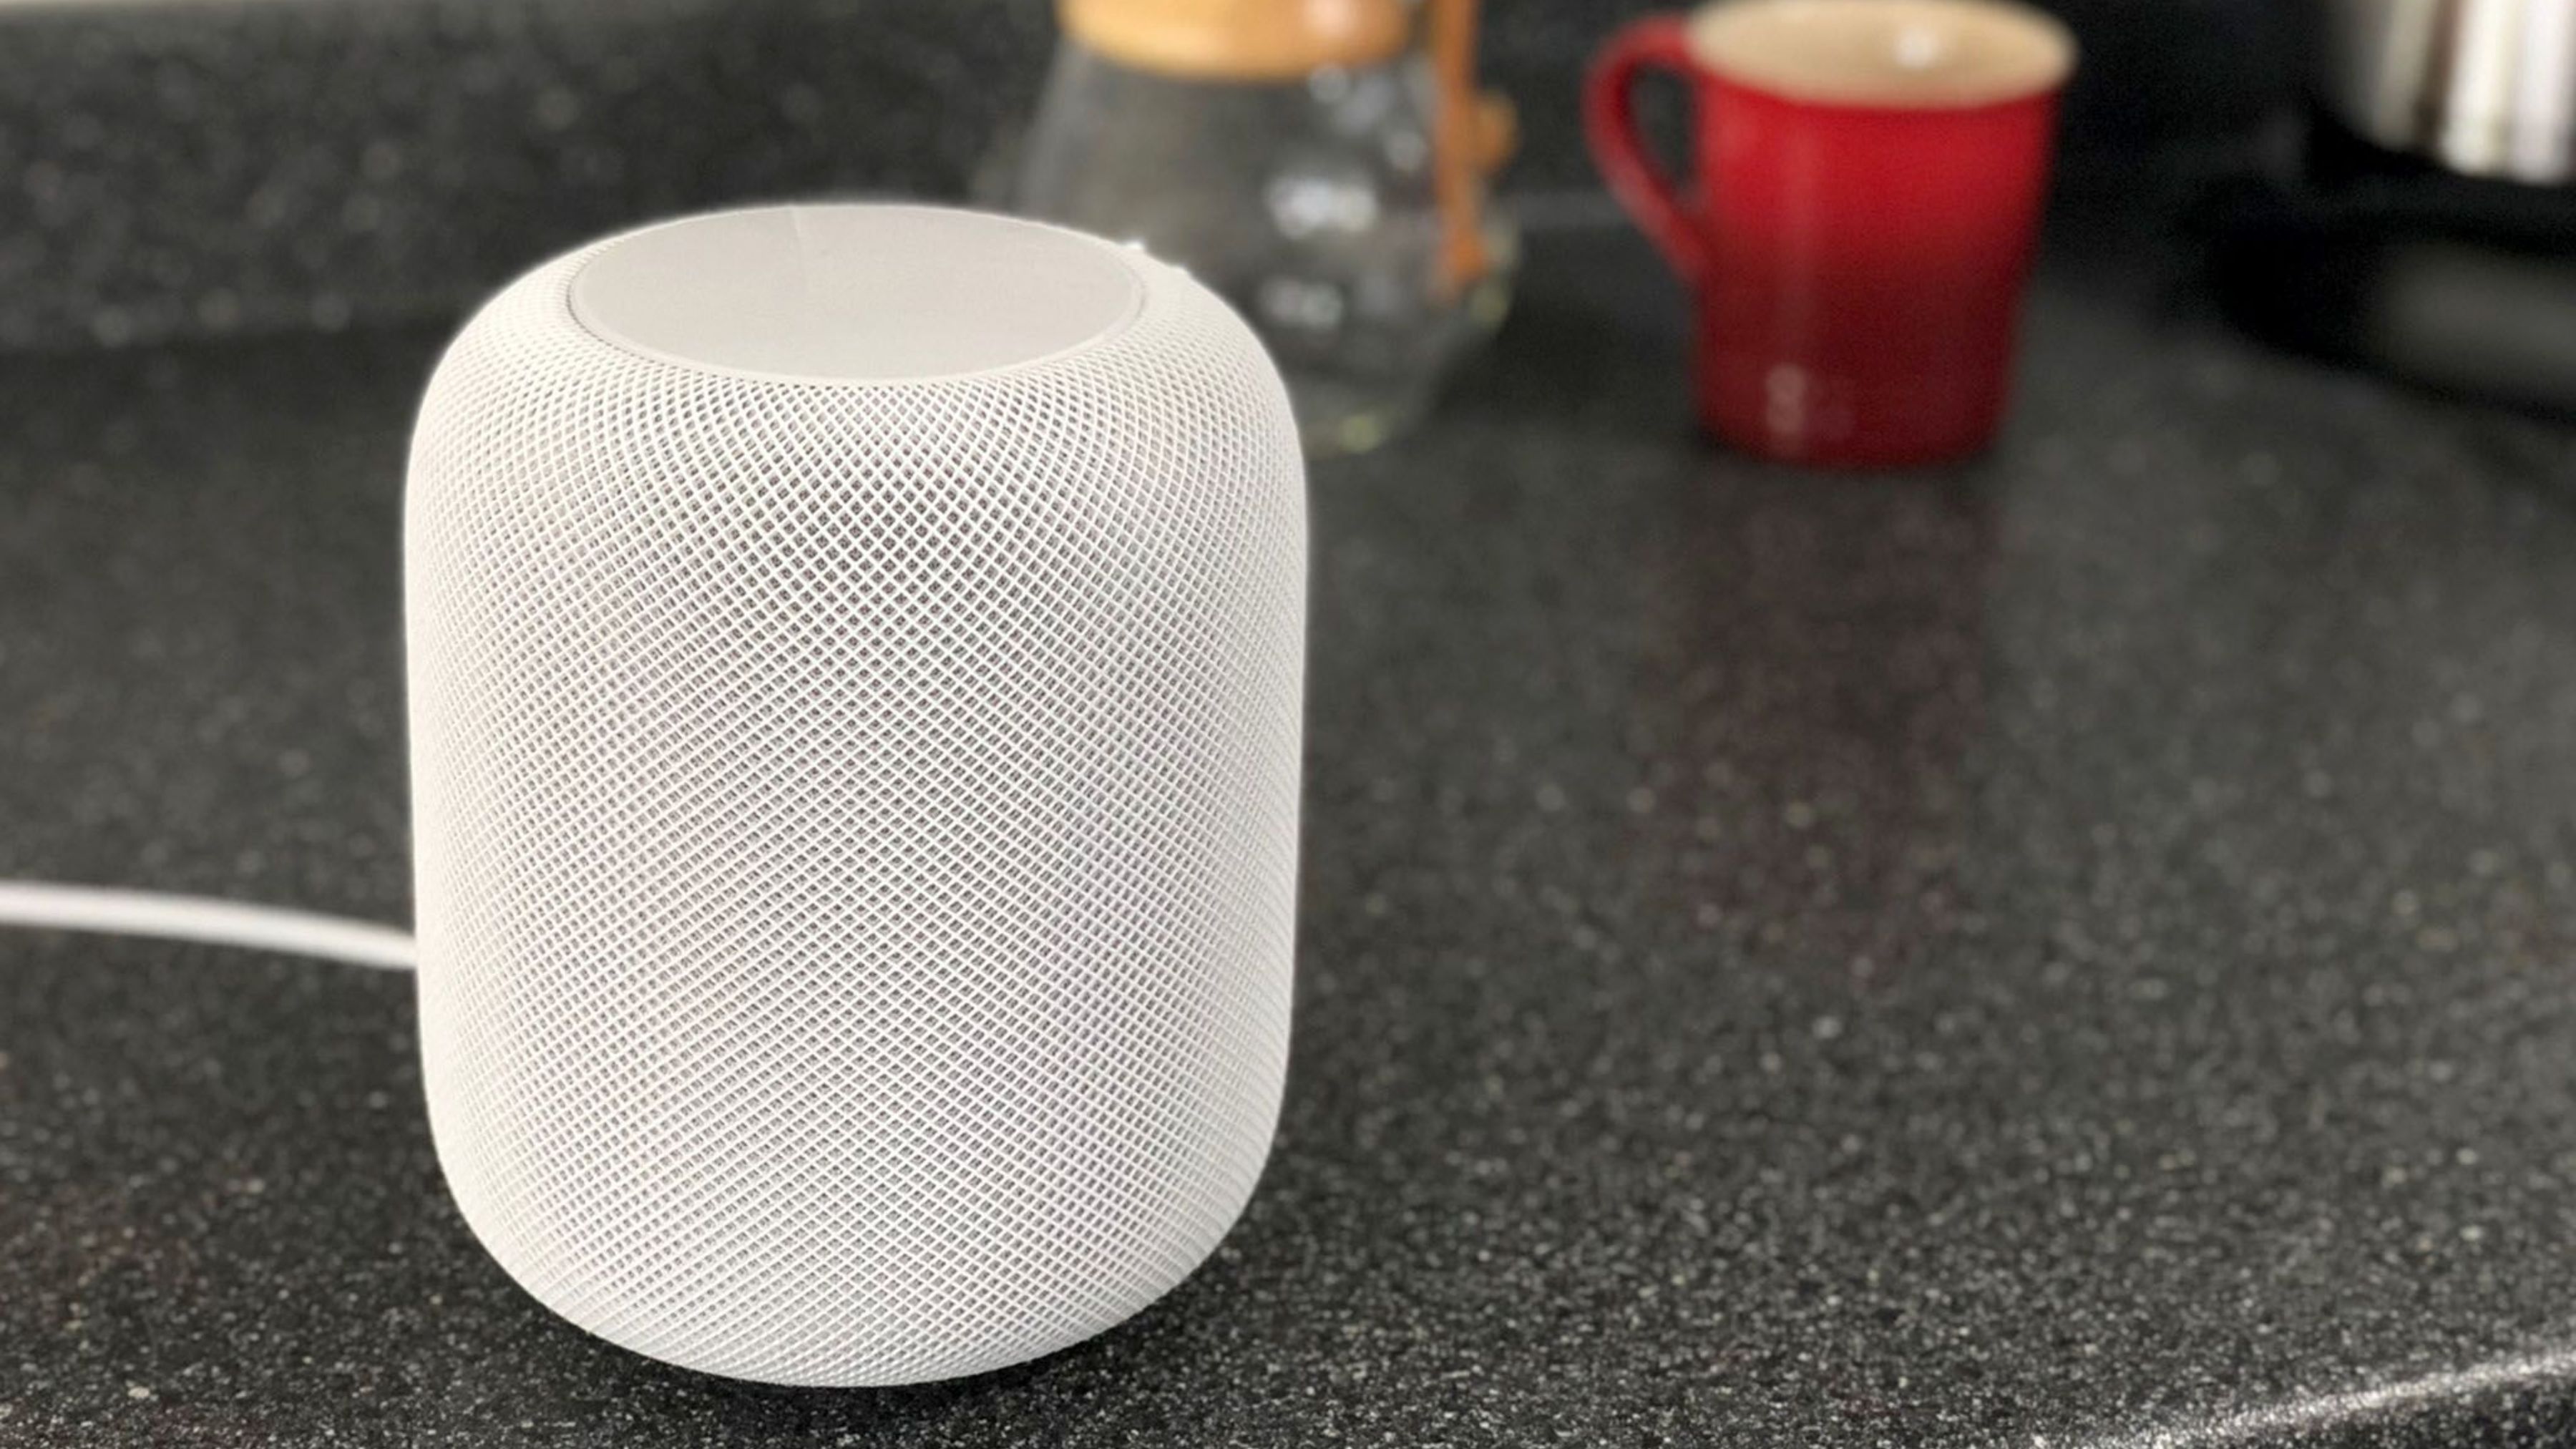 HomePod sitting on a Kitchen counter